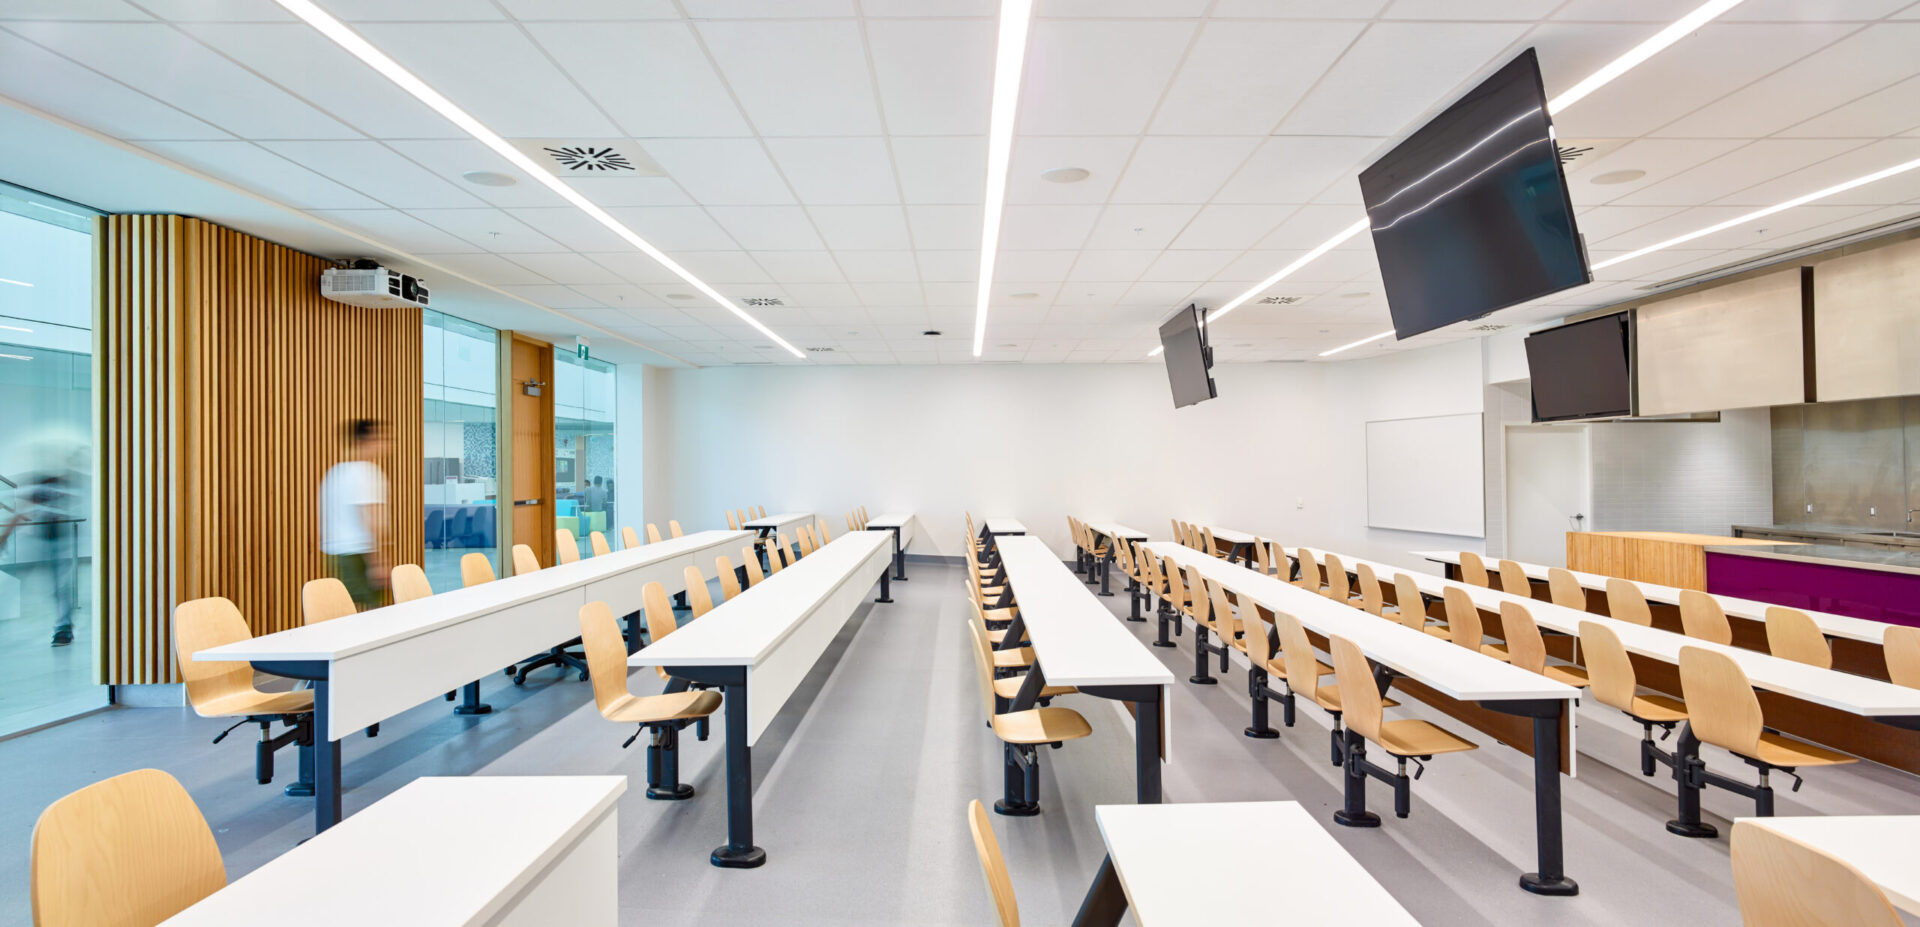 A large lecture hall with architecture and engineering design elements.